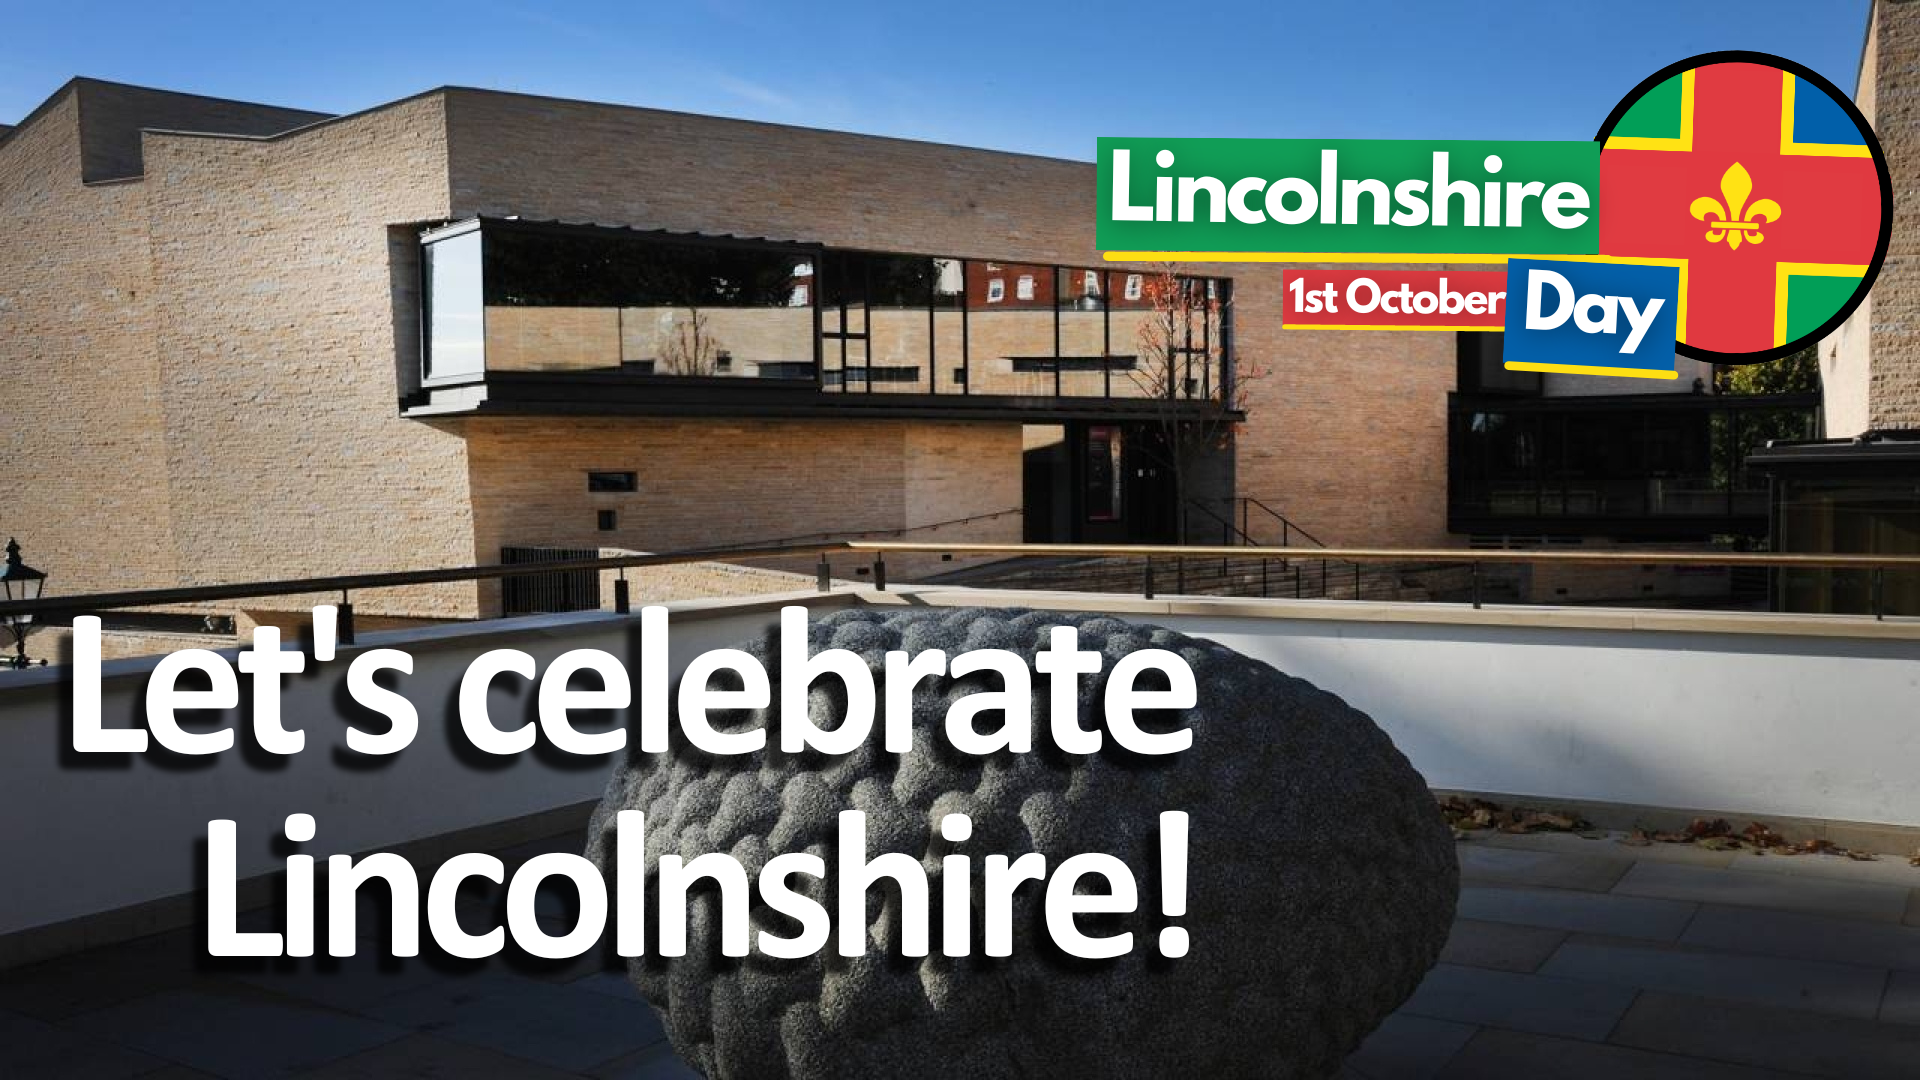 Lincolnshire Day at The Collection